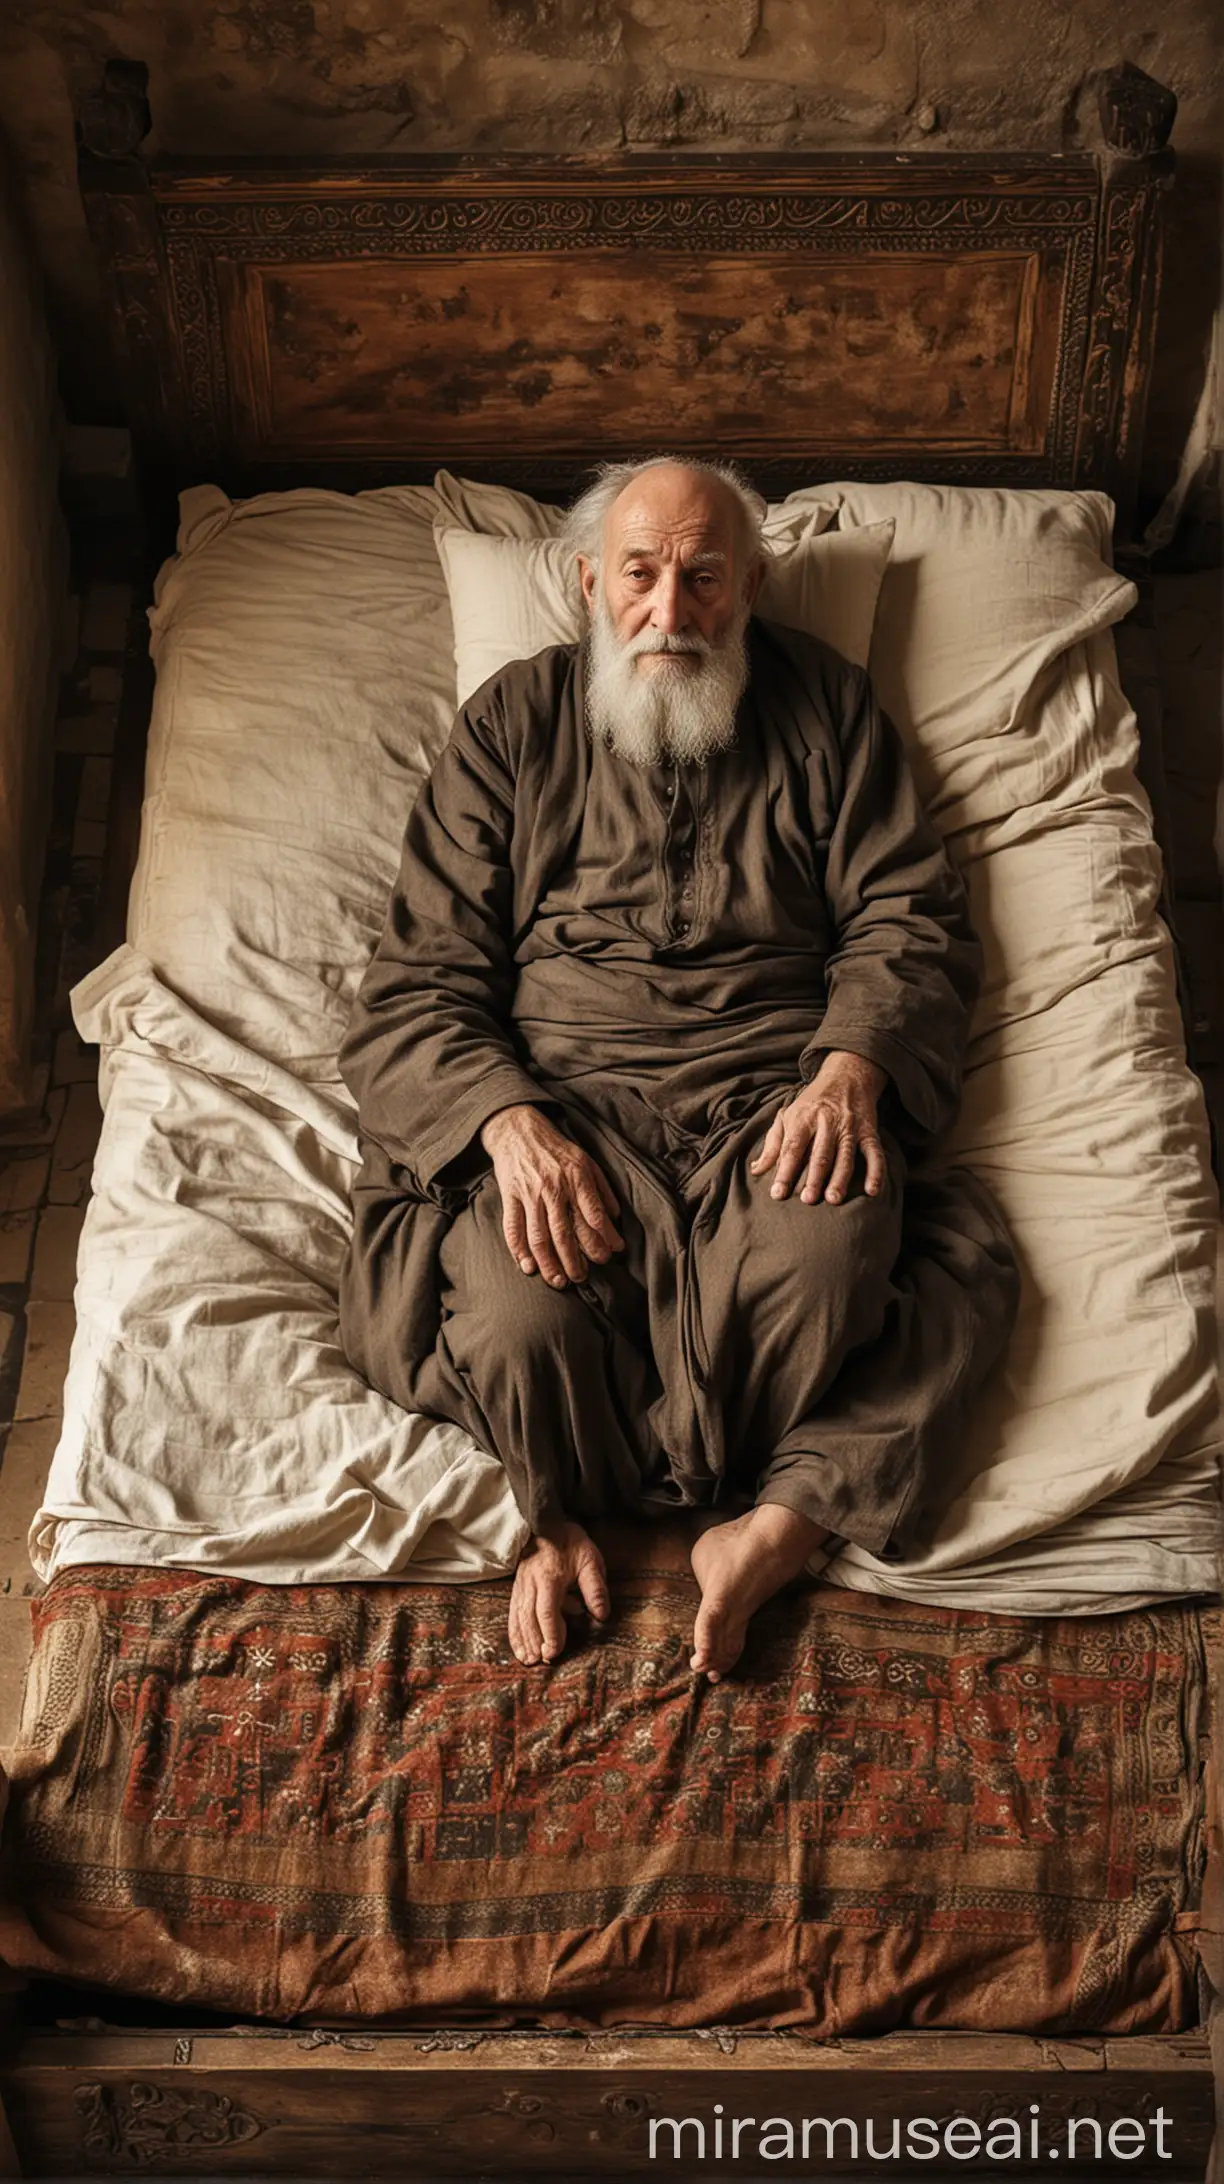 A old Jewish man lay on an ancient bed in ancient world